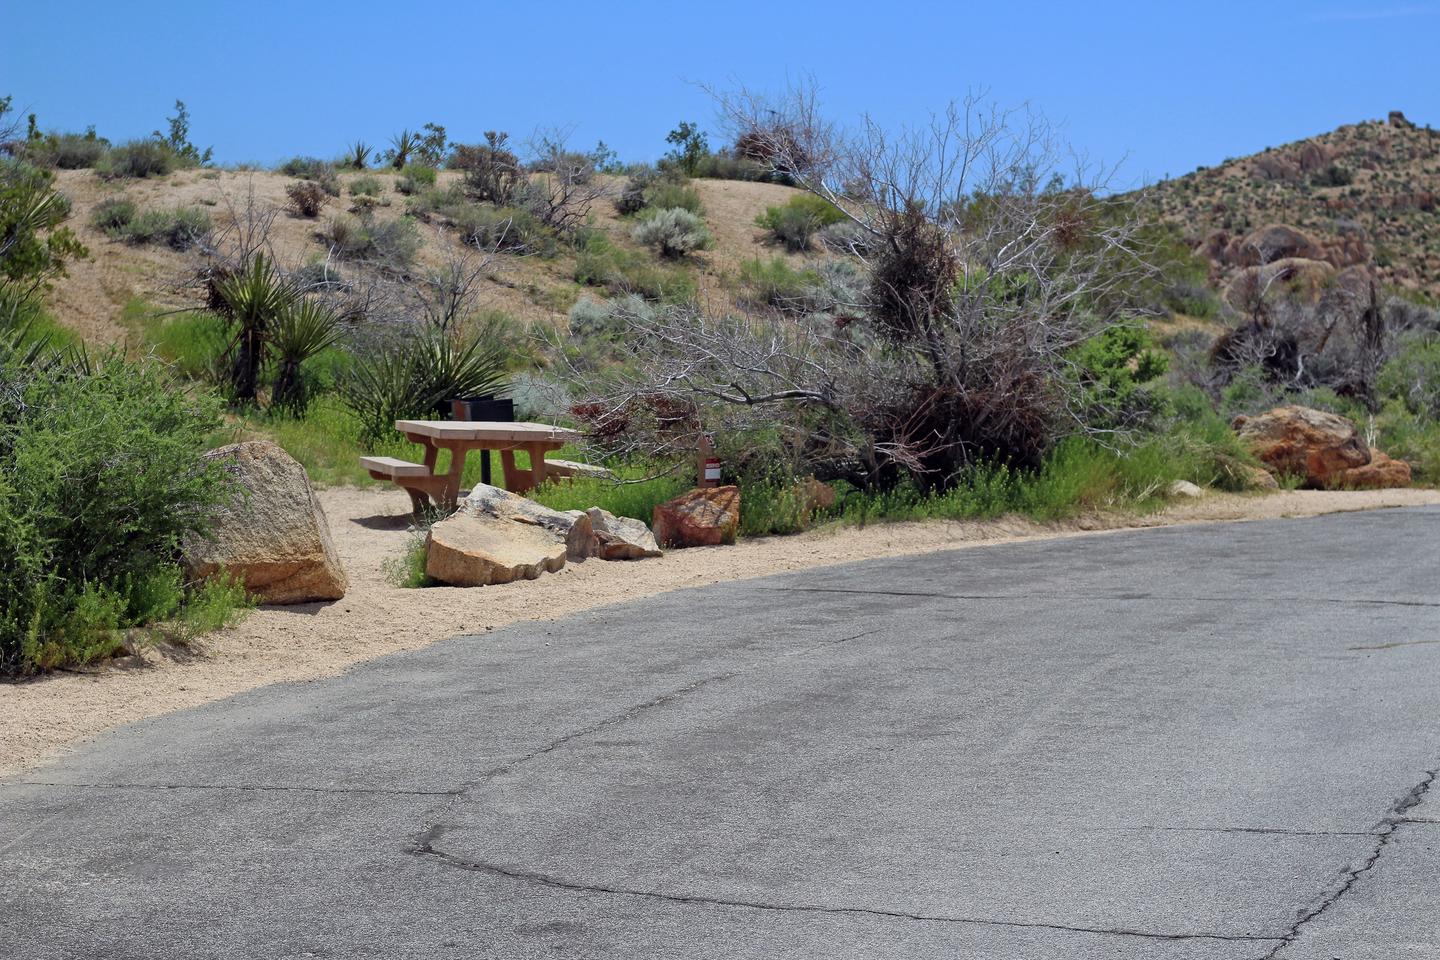 Parking for campsite. Picnic table surrounded by sand hill and green plants.Parking for campsite.